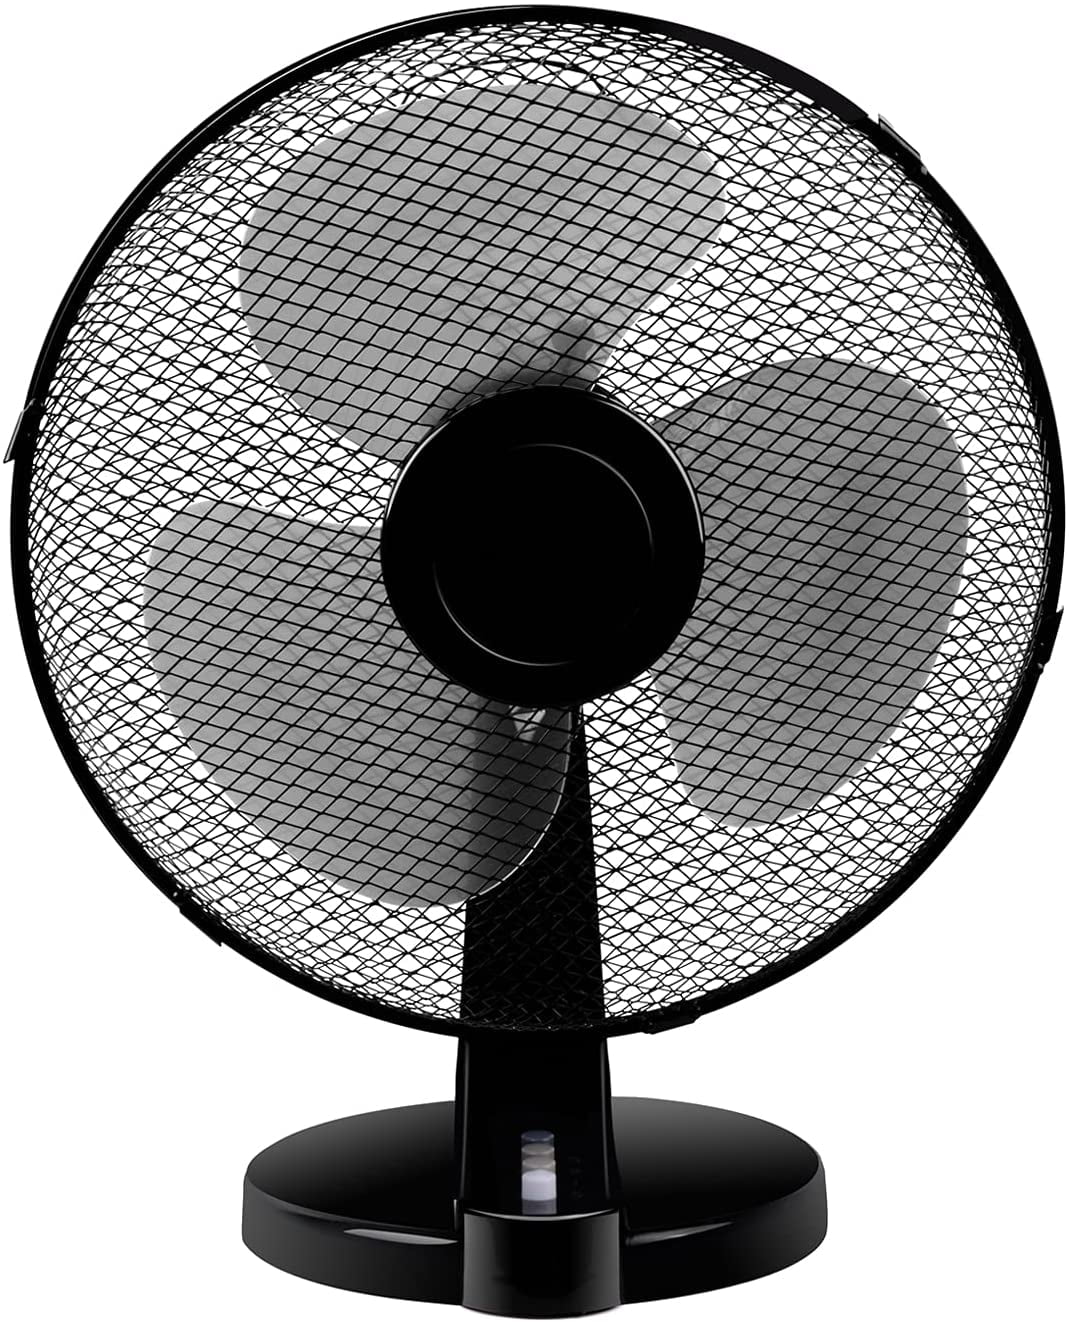 Portable Pedestal Air Circulator Black Simple Deluxe 3 Speed 16-inch Table Fan with Adjustable Tilt Auto-Oscillating